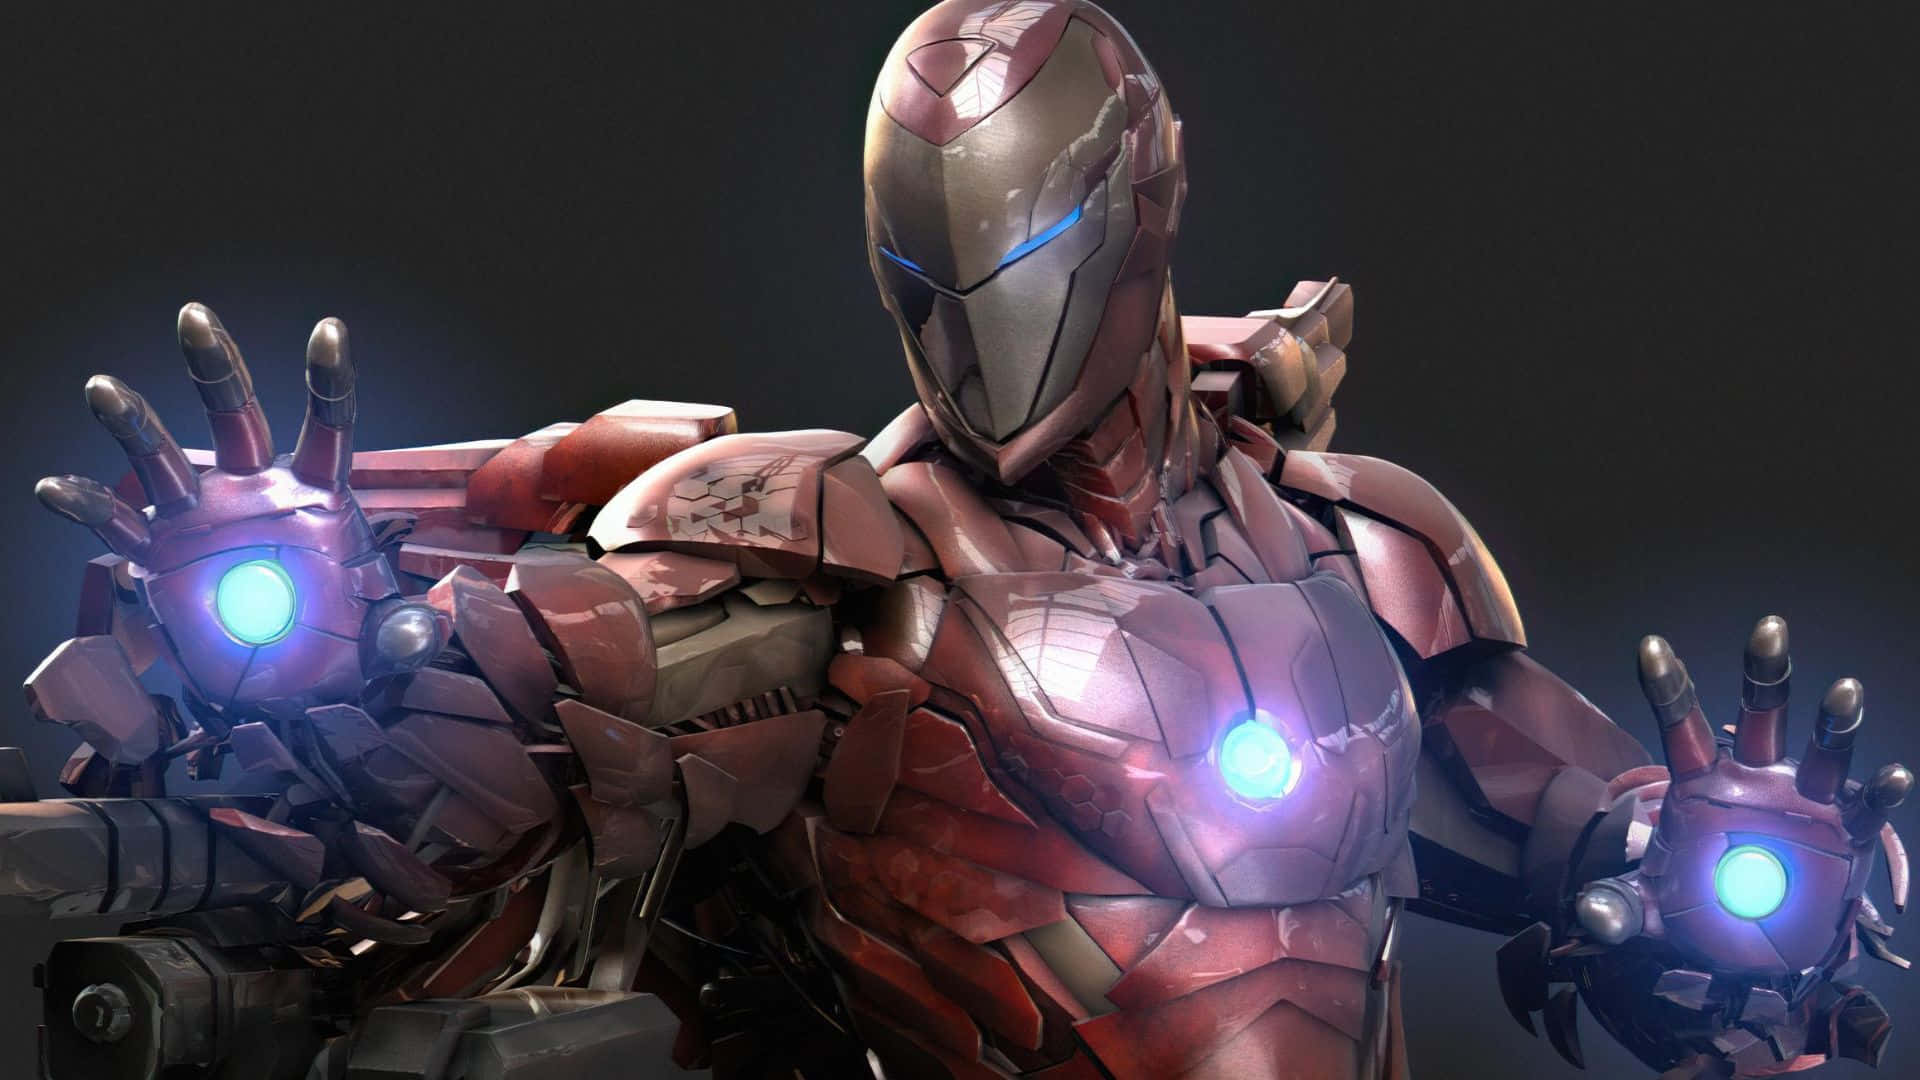 Iron Man equipped with his full weapon arsenal. Wallpaper